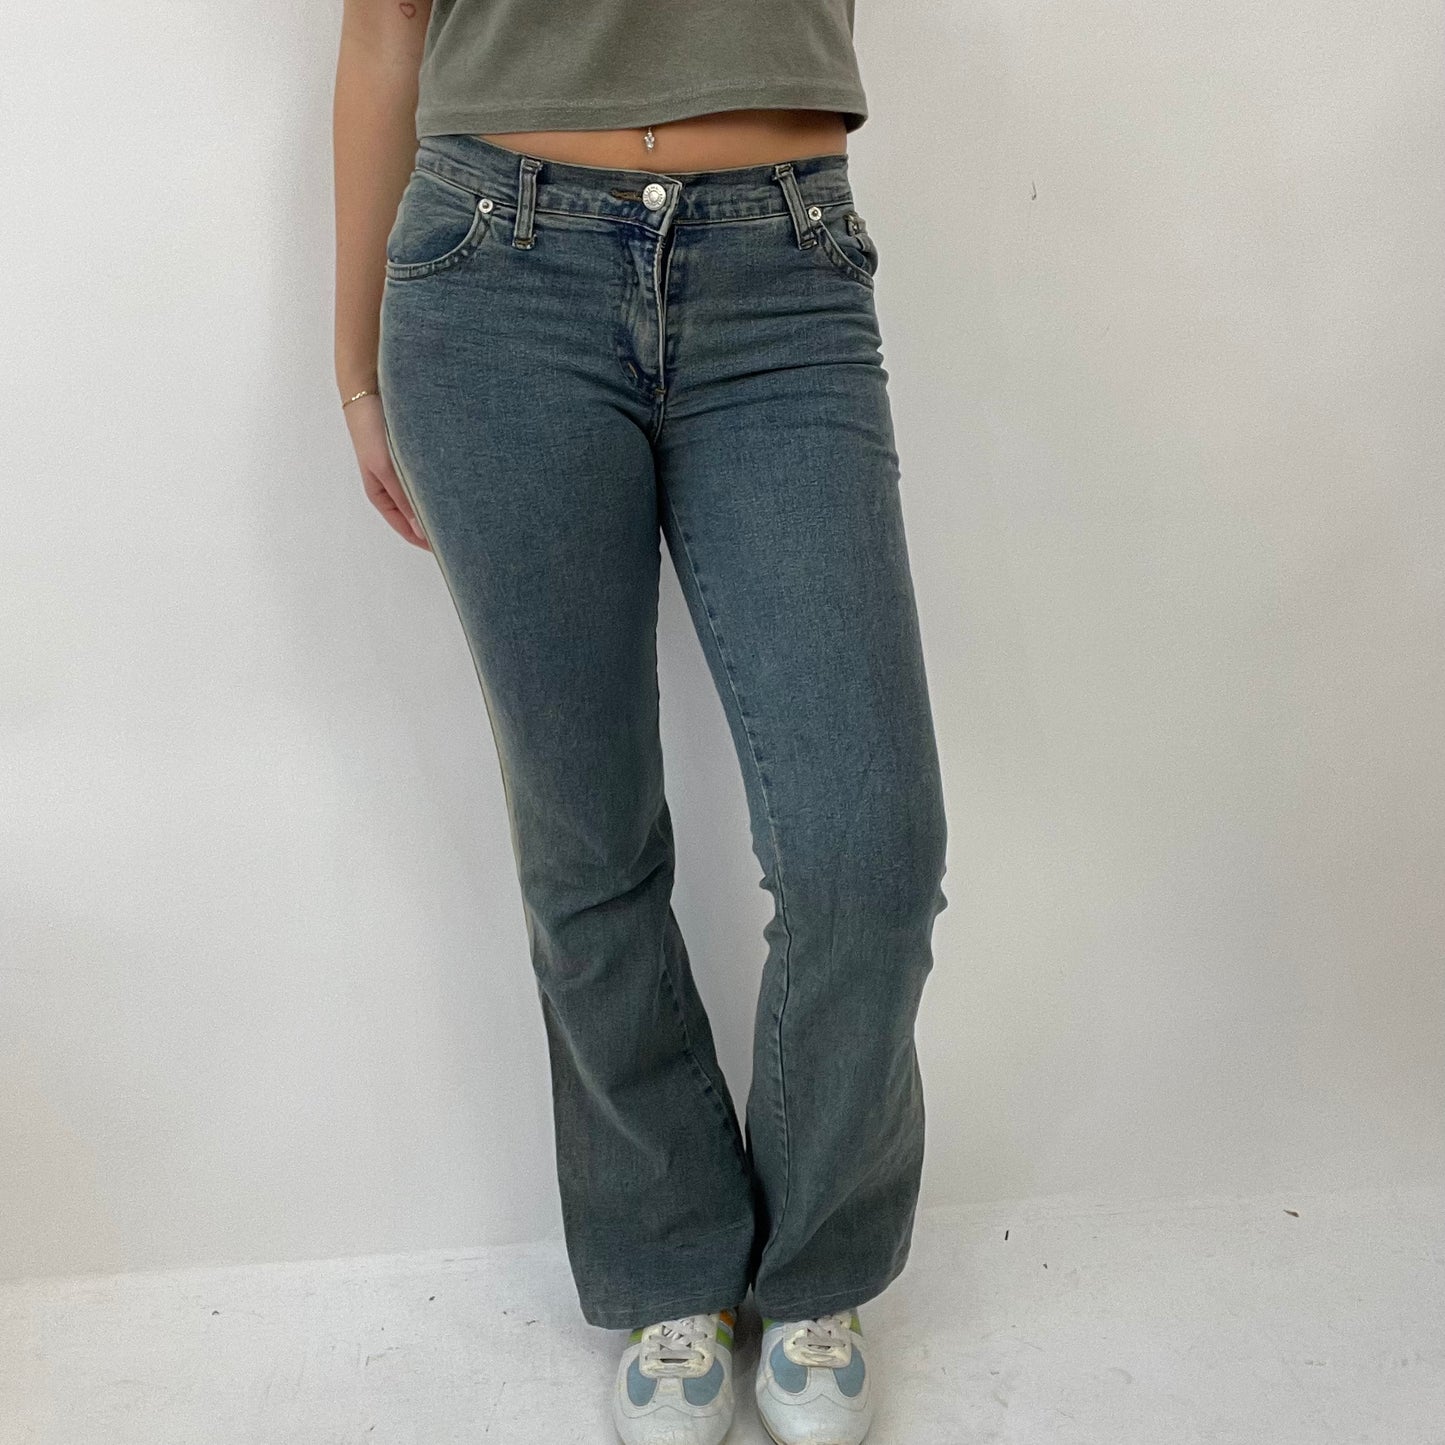 COTTAGECORE DROP | small blue jeans with faded side detail